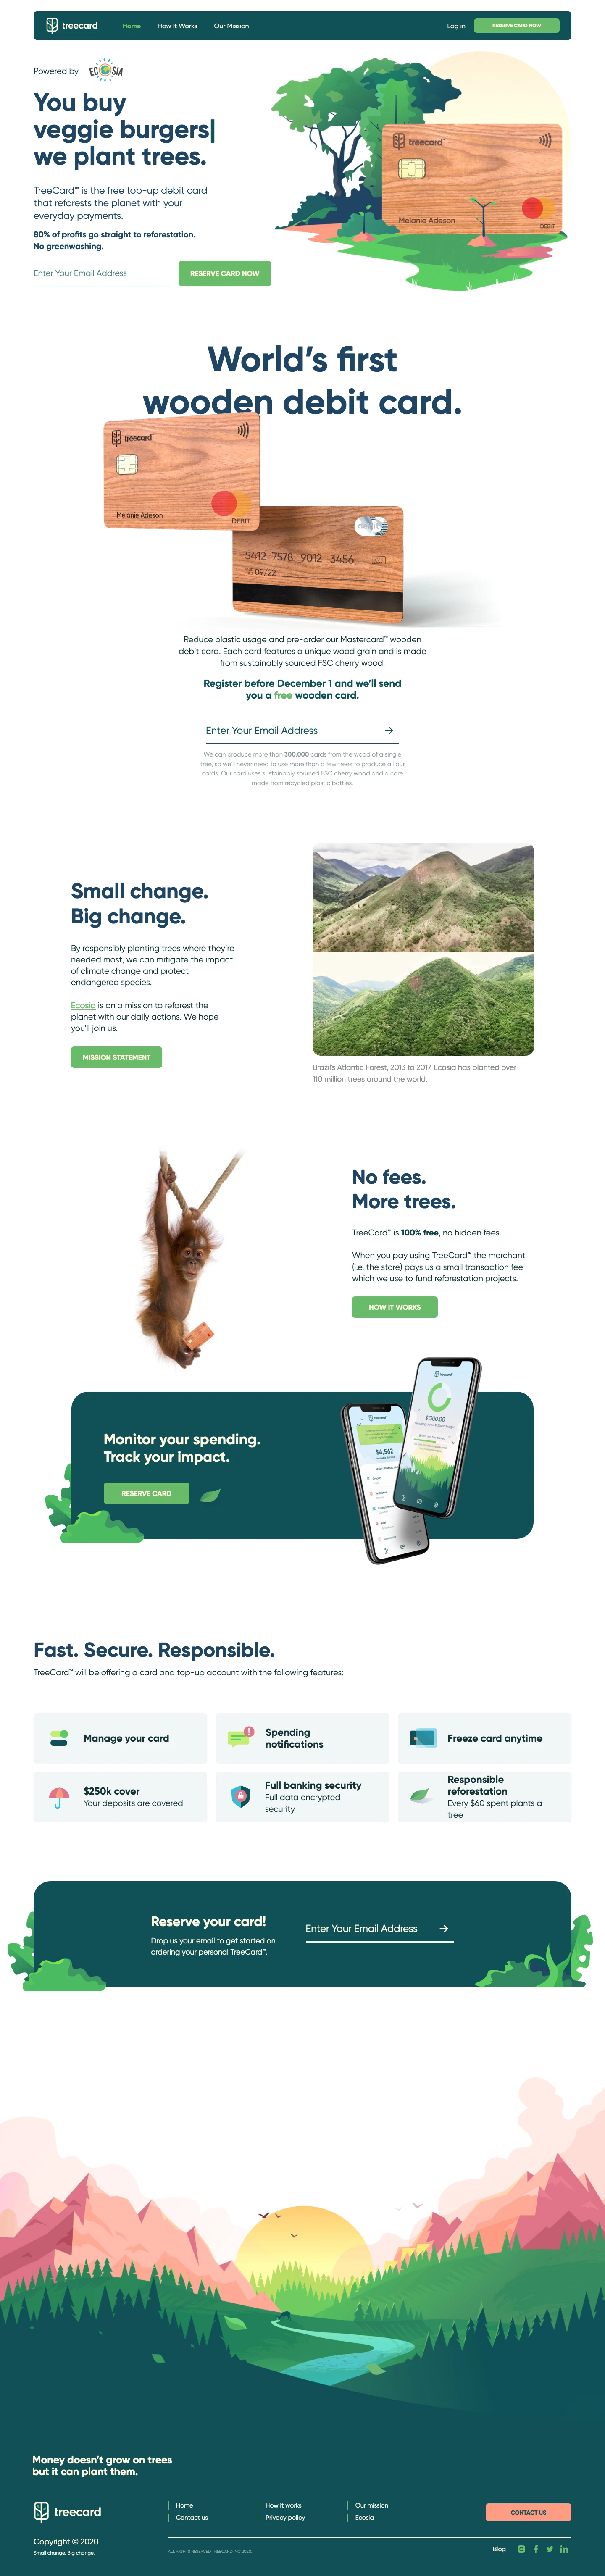 TreeCard Landing Page Example: TreeCard is the free top-up debit card that reforests the planet with your everyday payments. 80% of profits go straight to reforestation. World’s first wooden debit card. No greenwashing, no fees.